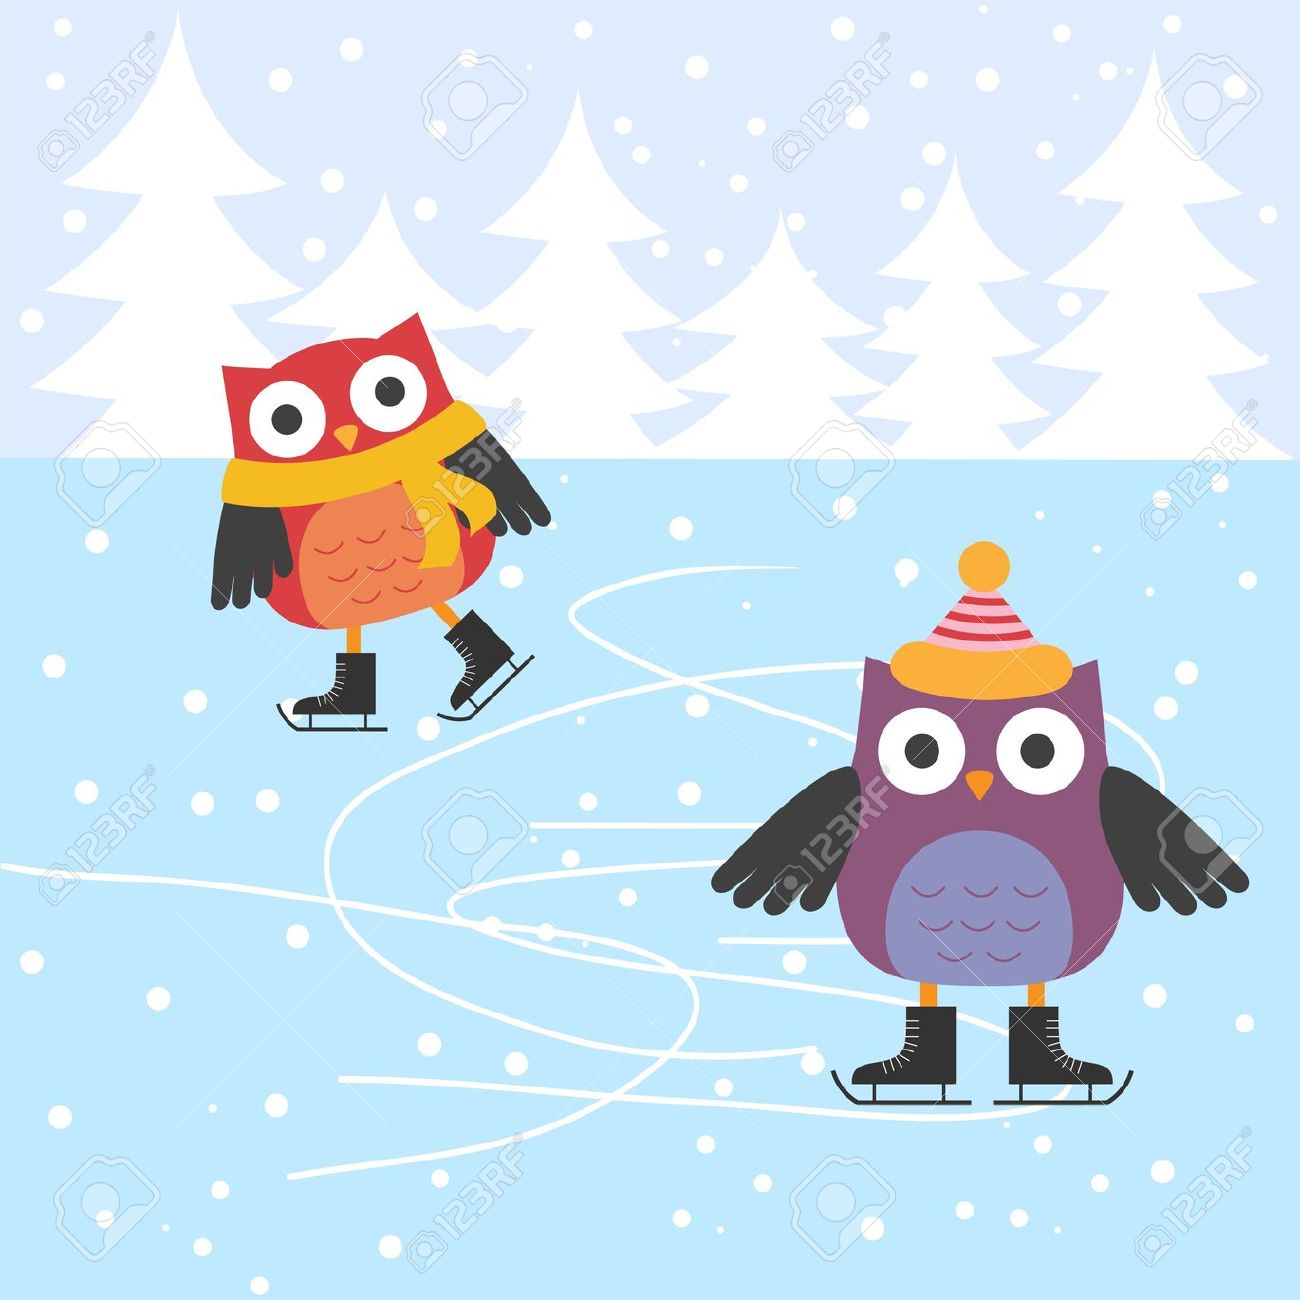 Owl in snow clipart